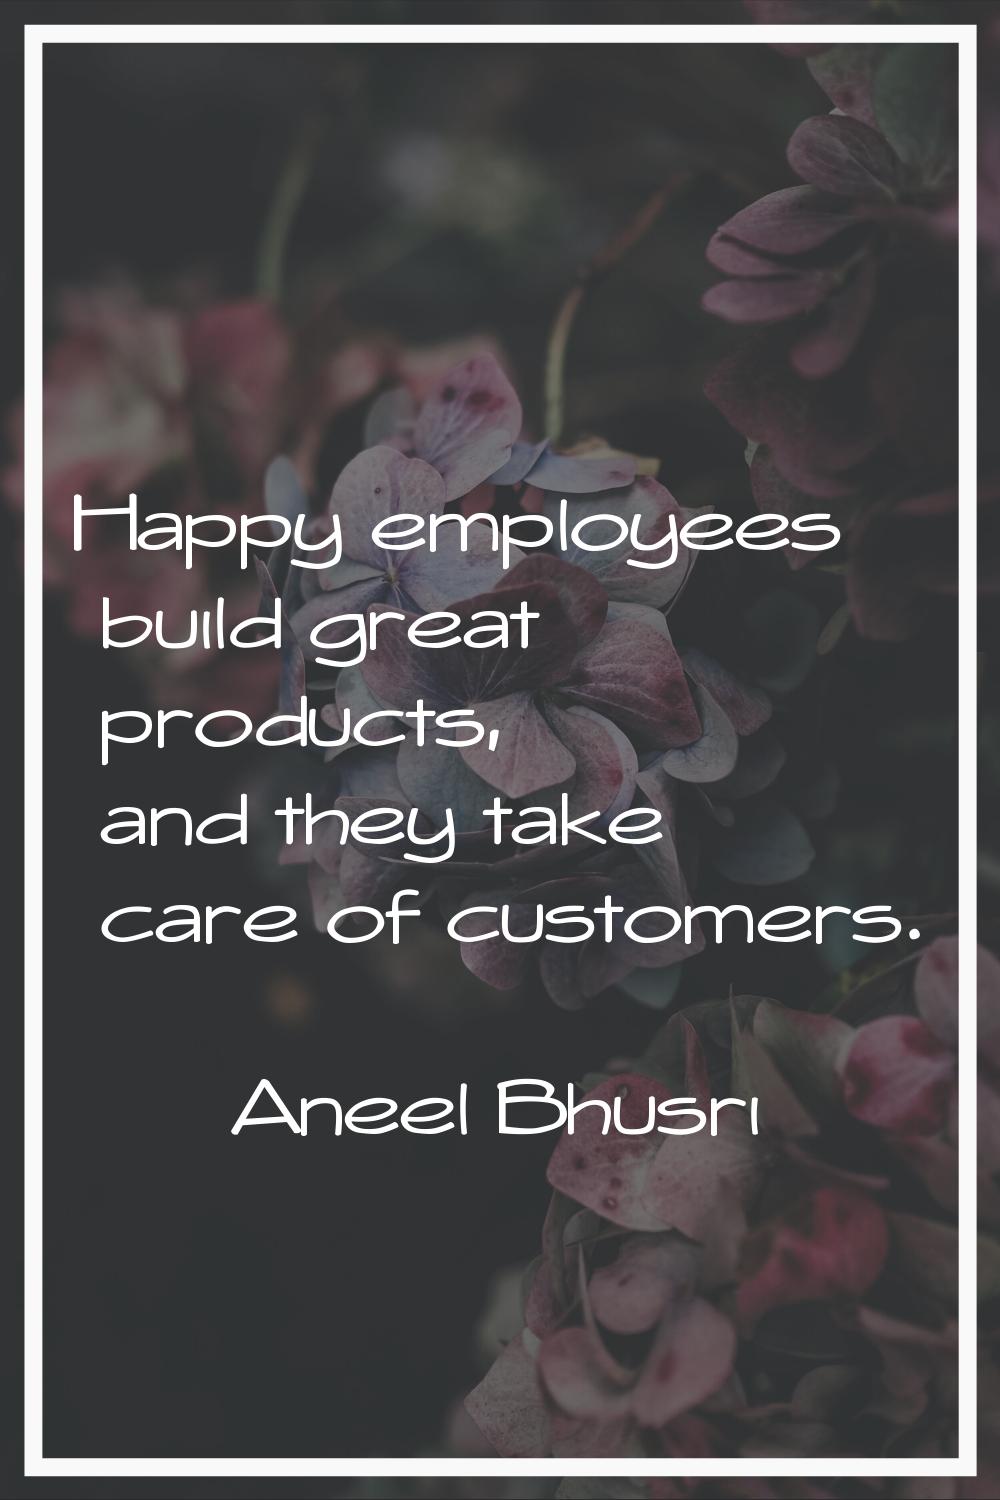 Happy employees build great products, and they take care of customers.